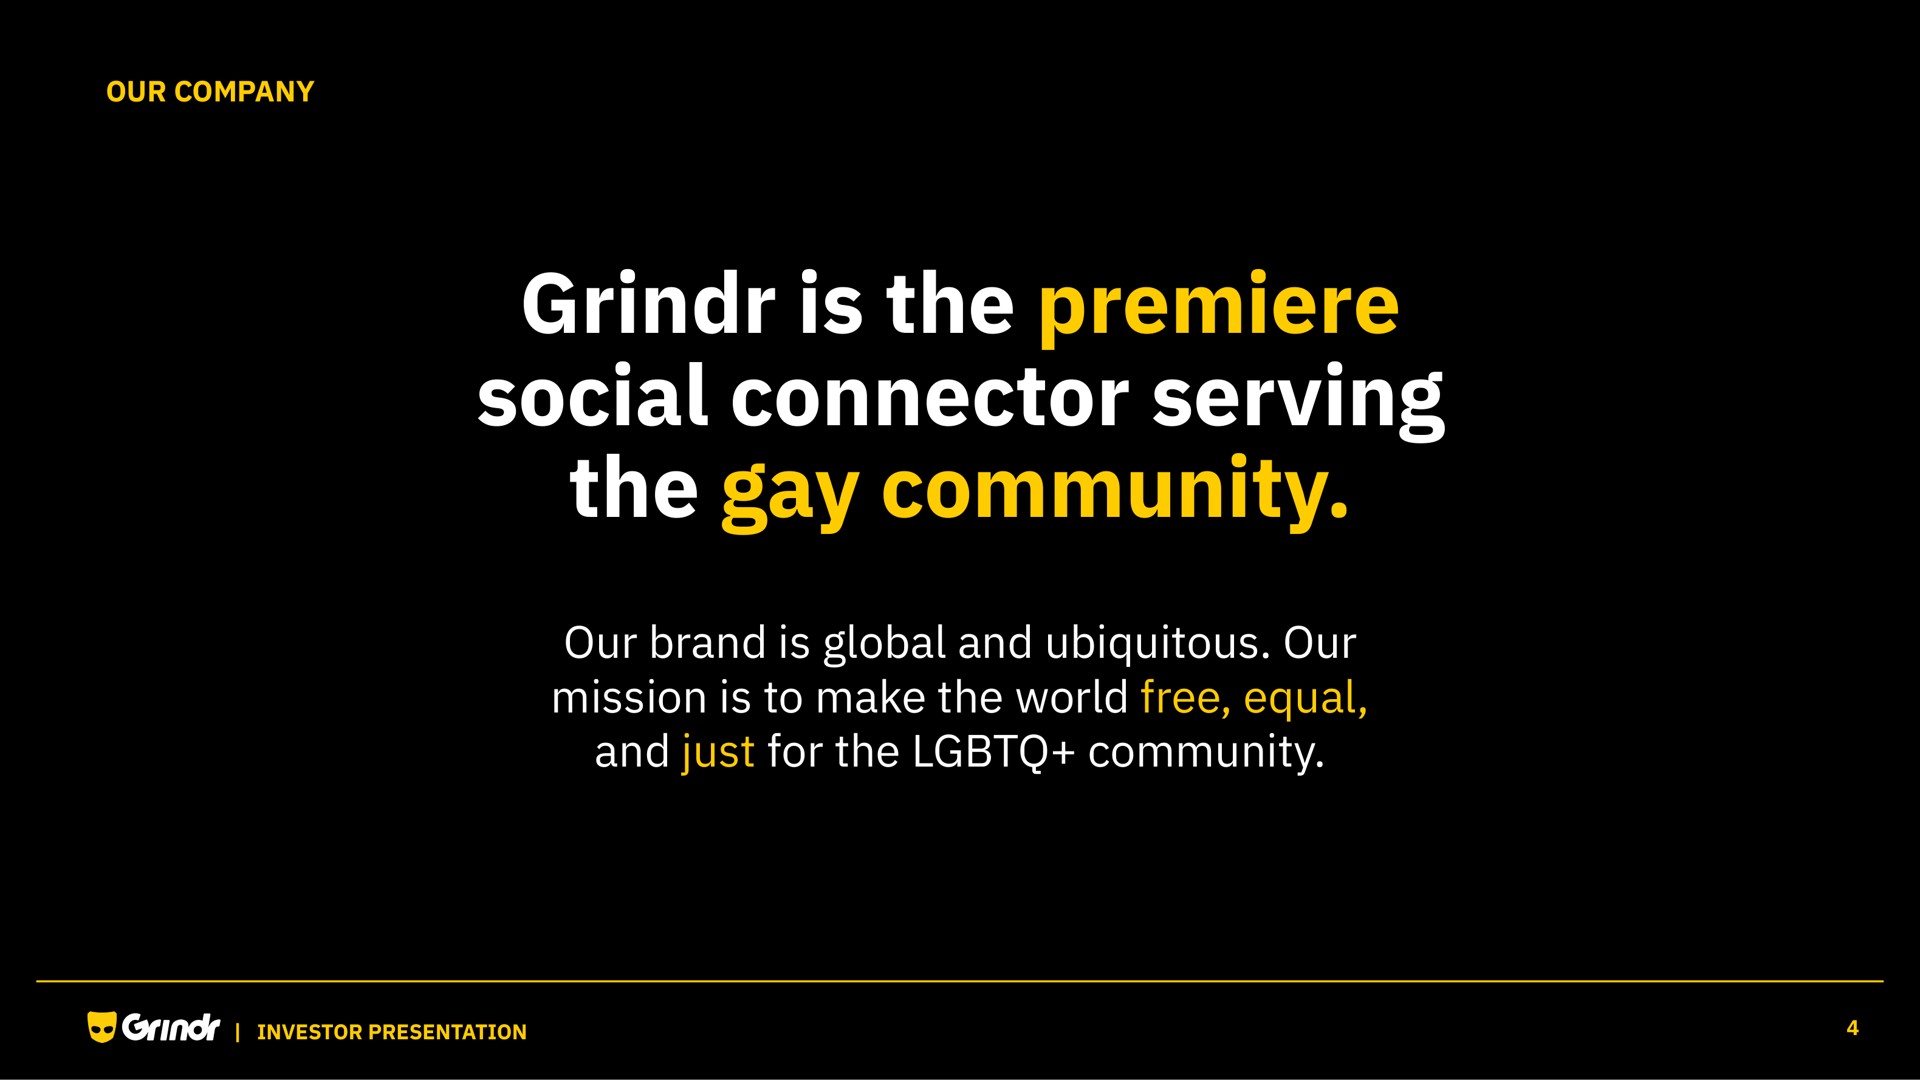 is the premiere social connector serving the gay community | Grindr